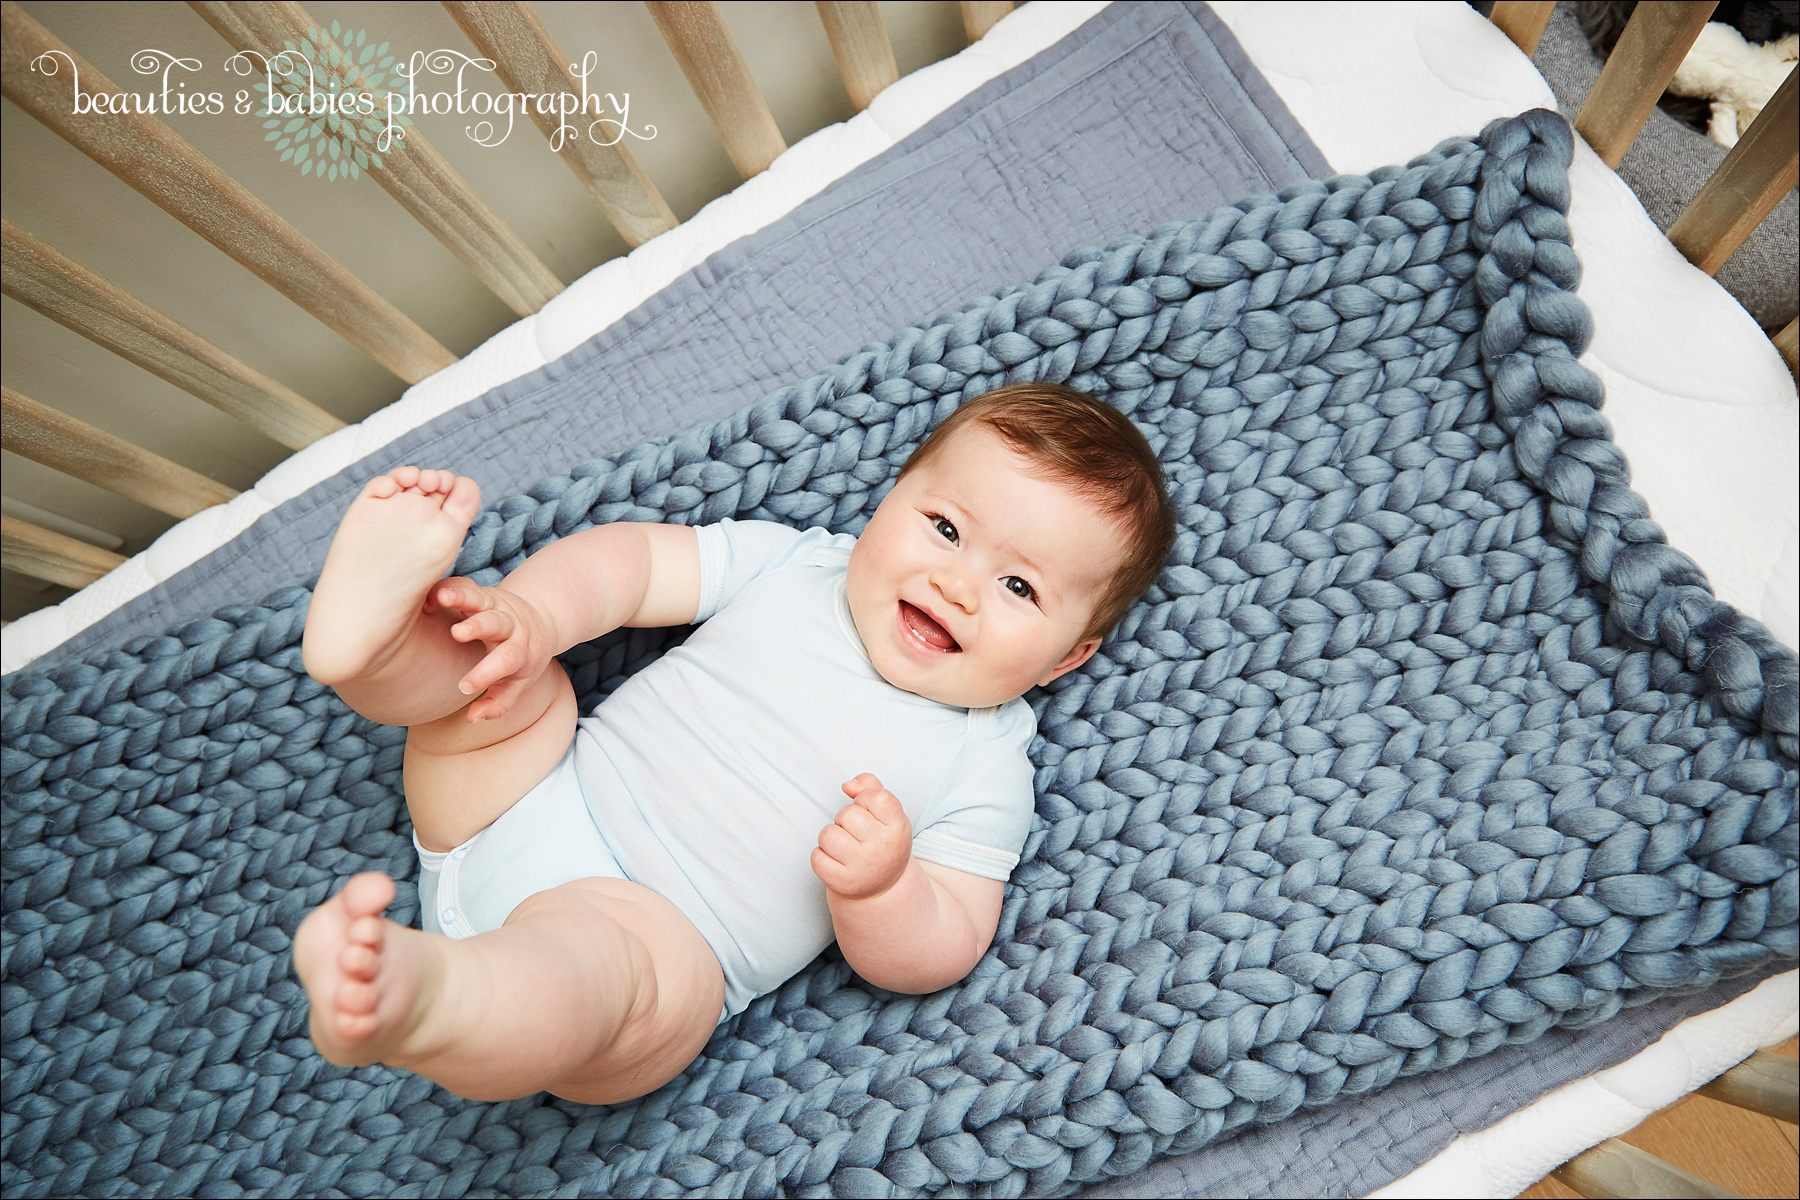 Baby clothing company photographer Los Angeles commercial photography baby and kids clothes